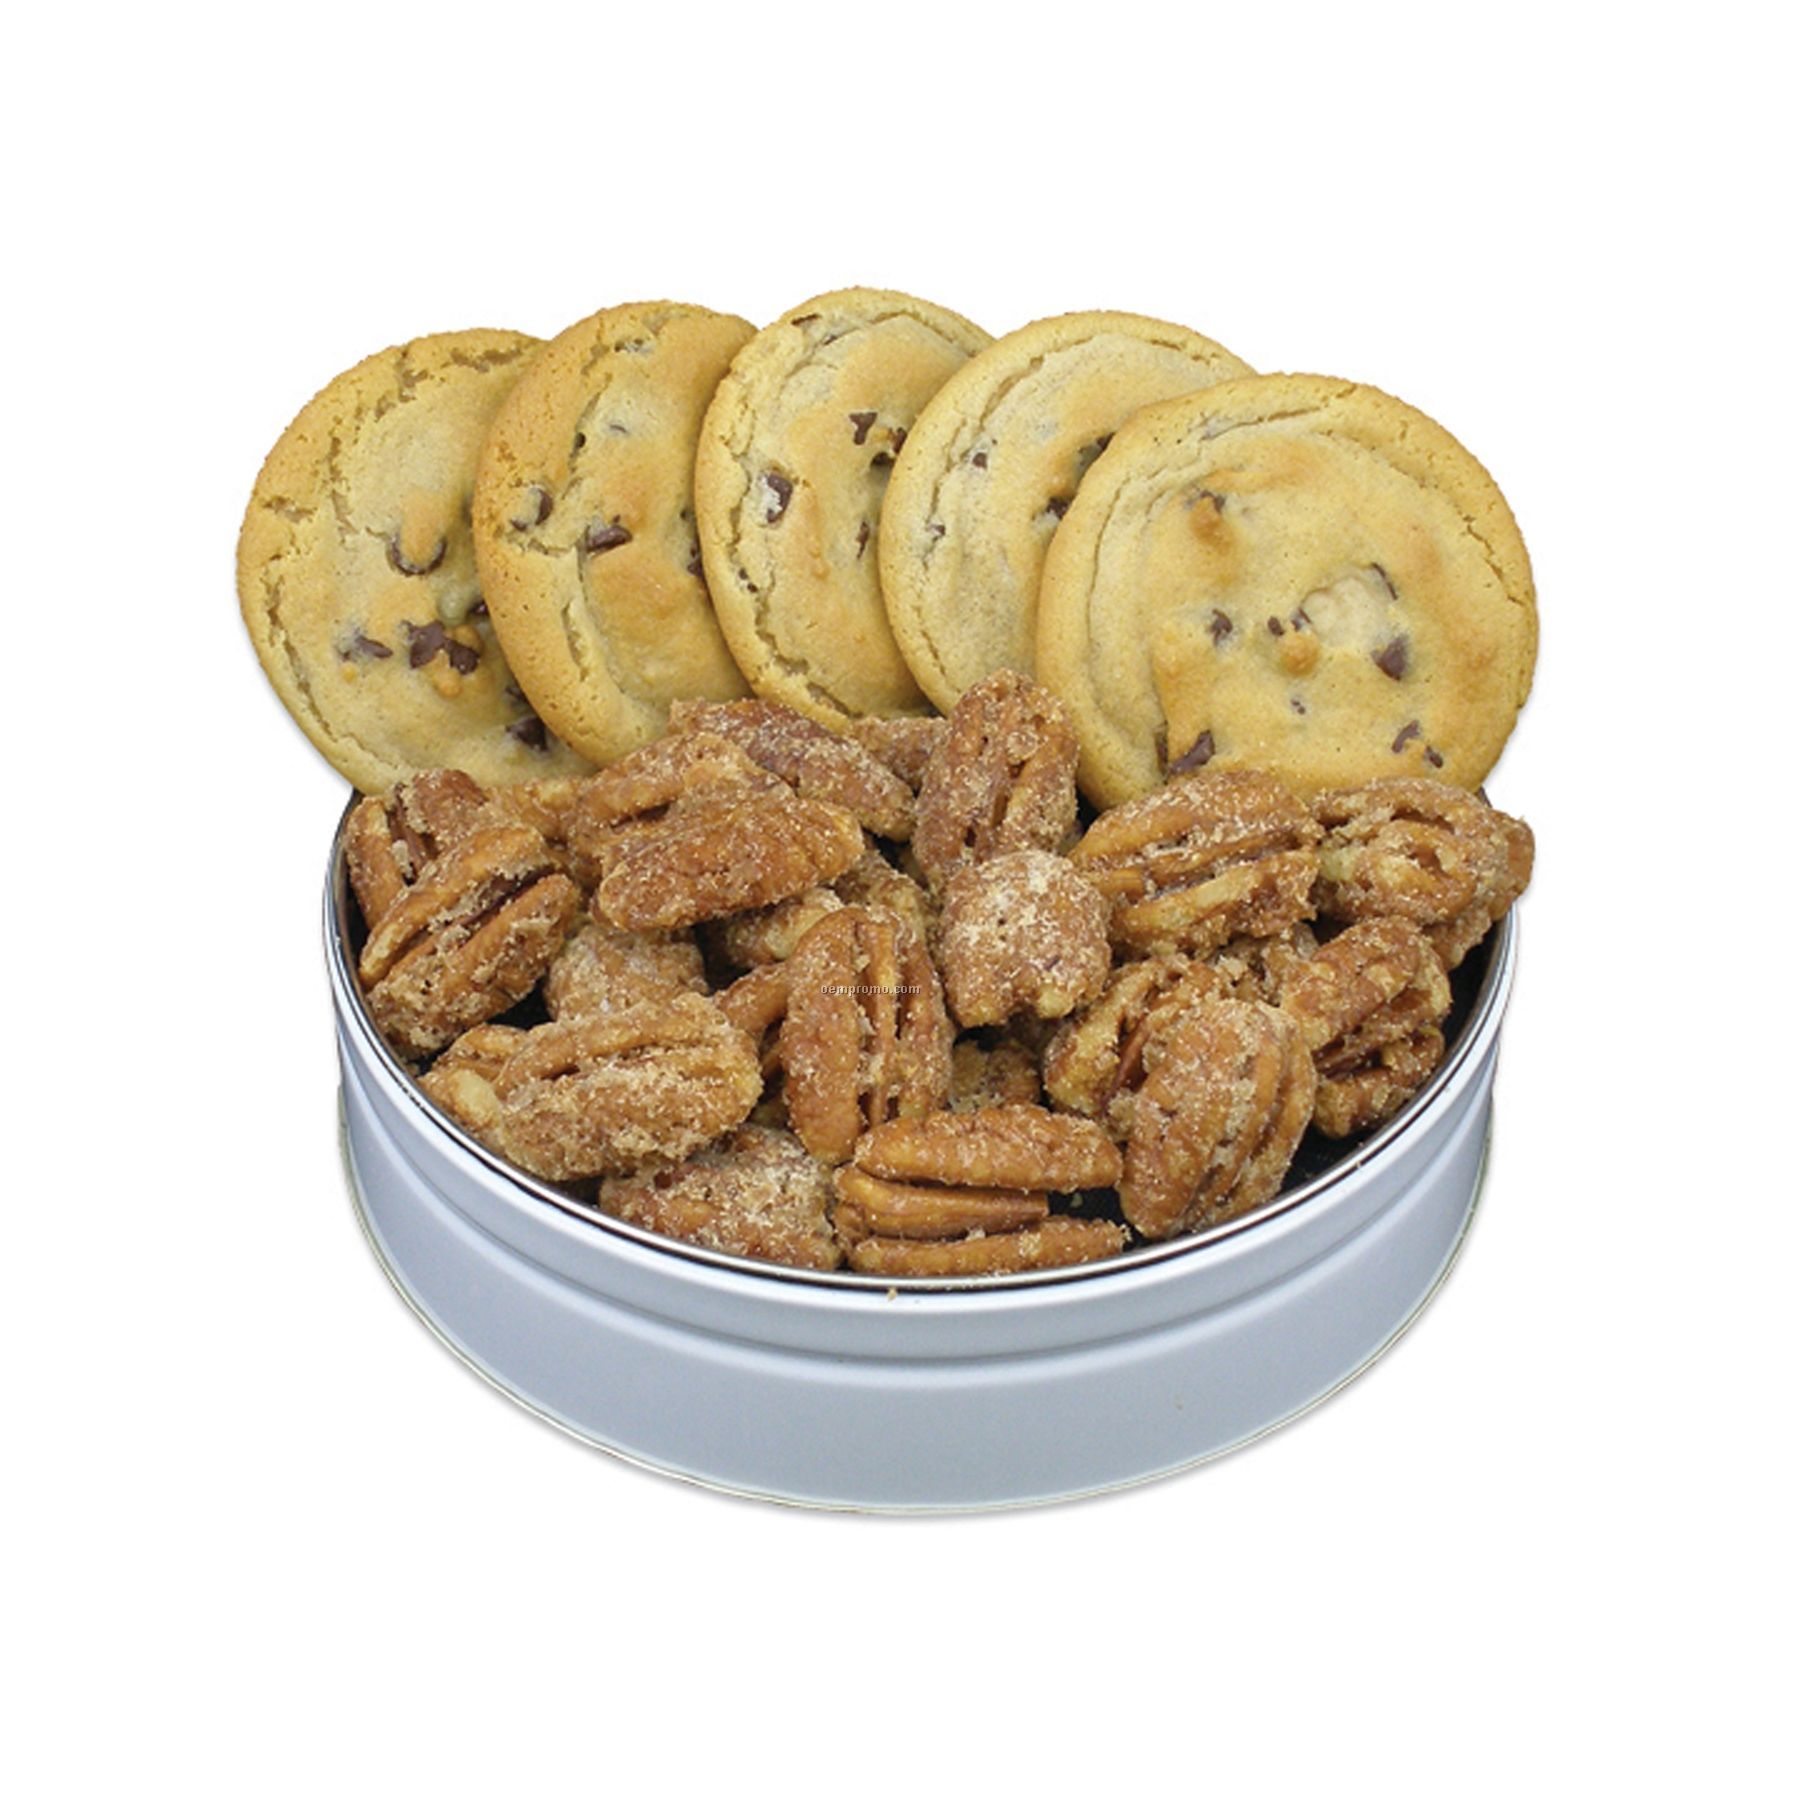 Cookie Nut Combos - Chocolate Chip (5 Cookies) Honey Toasted Pecans (4 Oz.)